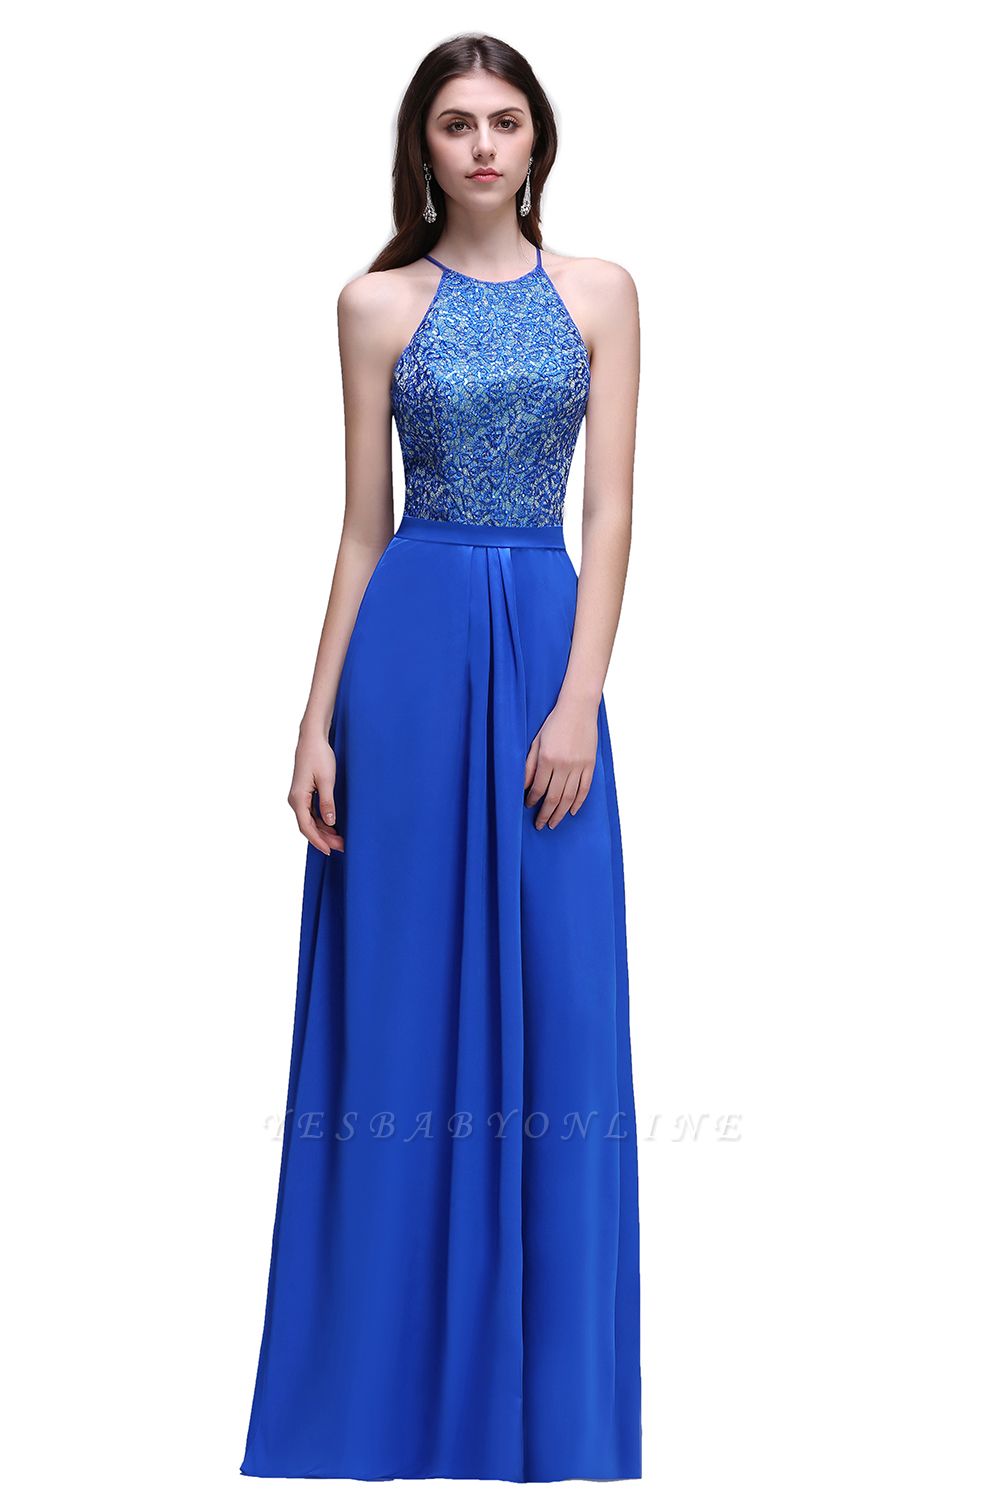 CALLIE | A-line Halter Neck Chiffon Royal Blue Prom Dresses with Sequins